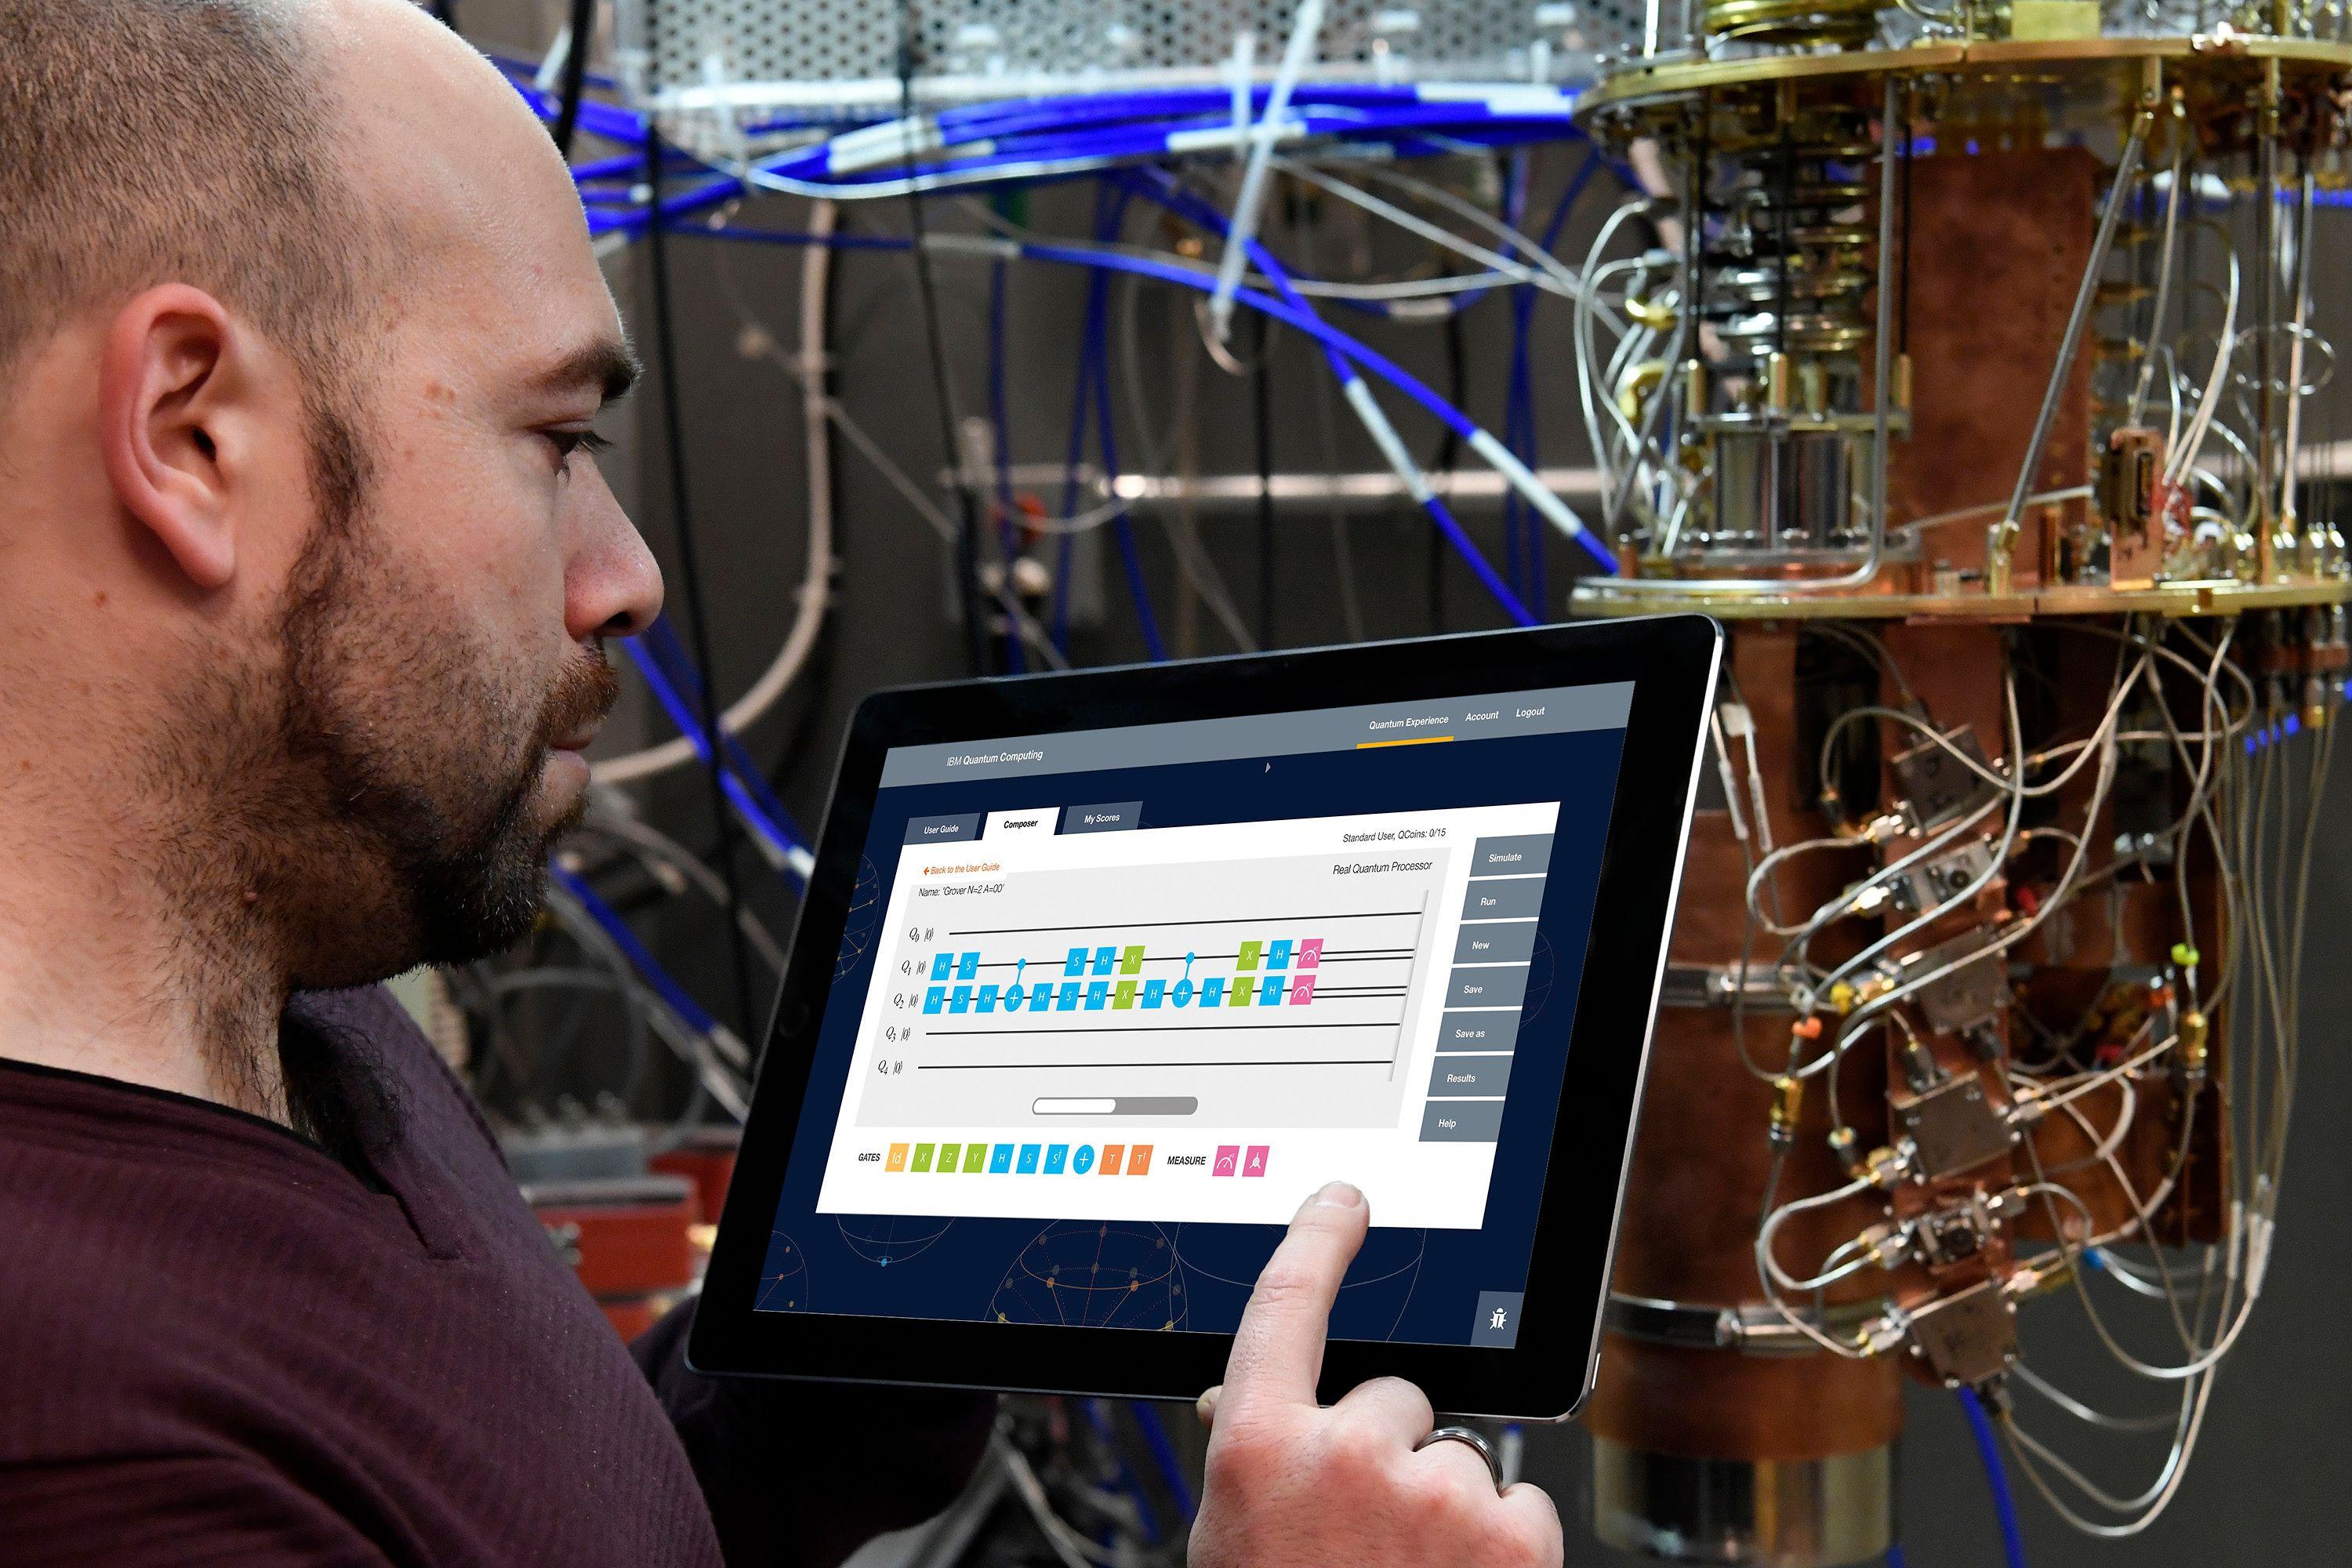 Research Scientist Antonio Córcoles uses the IBM Quantum Experience on a tablet